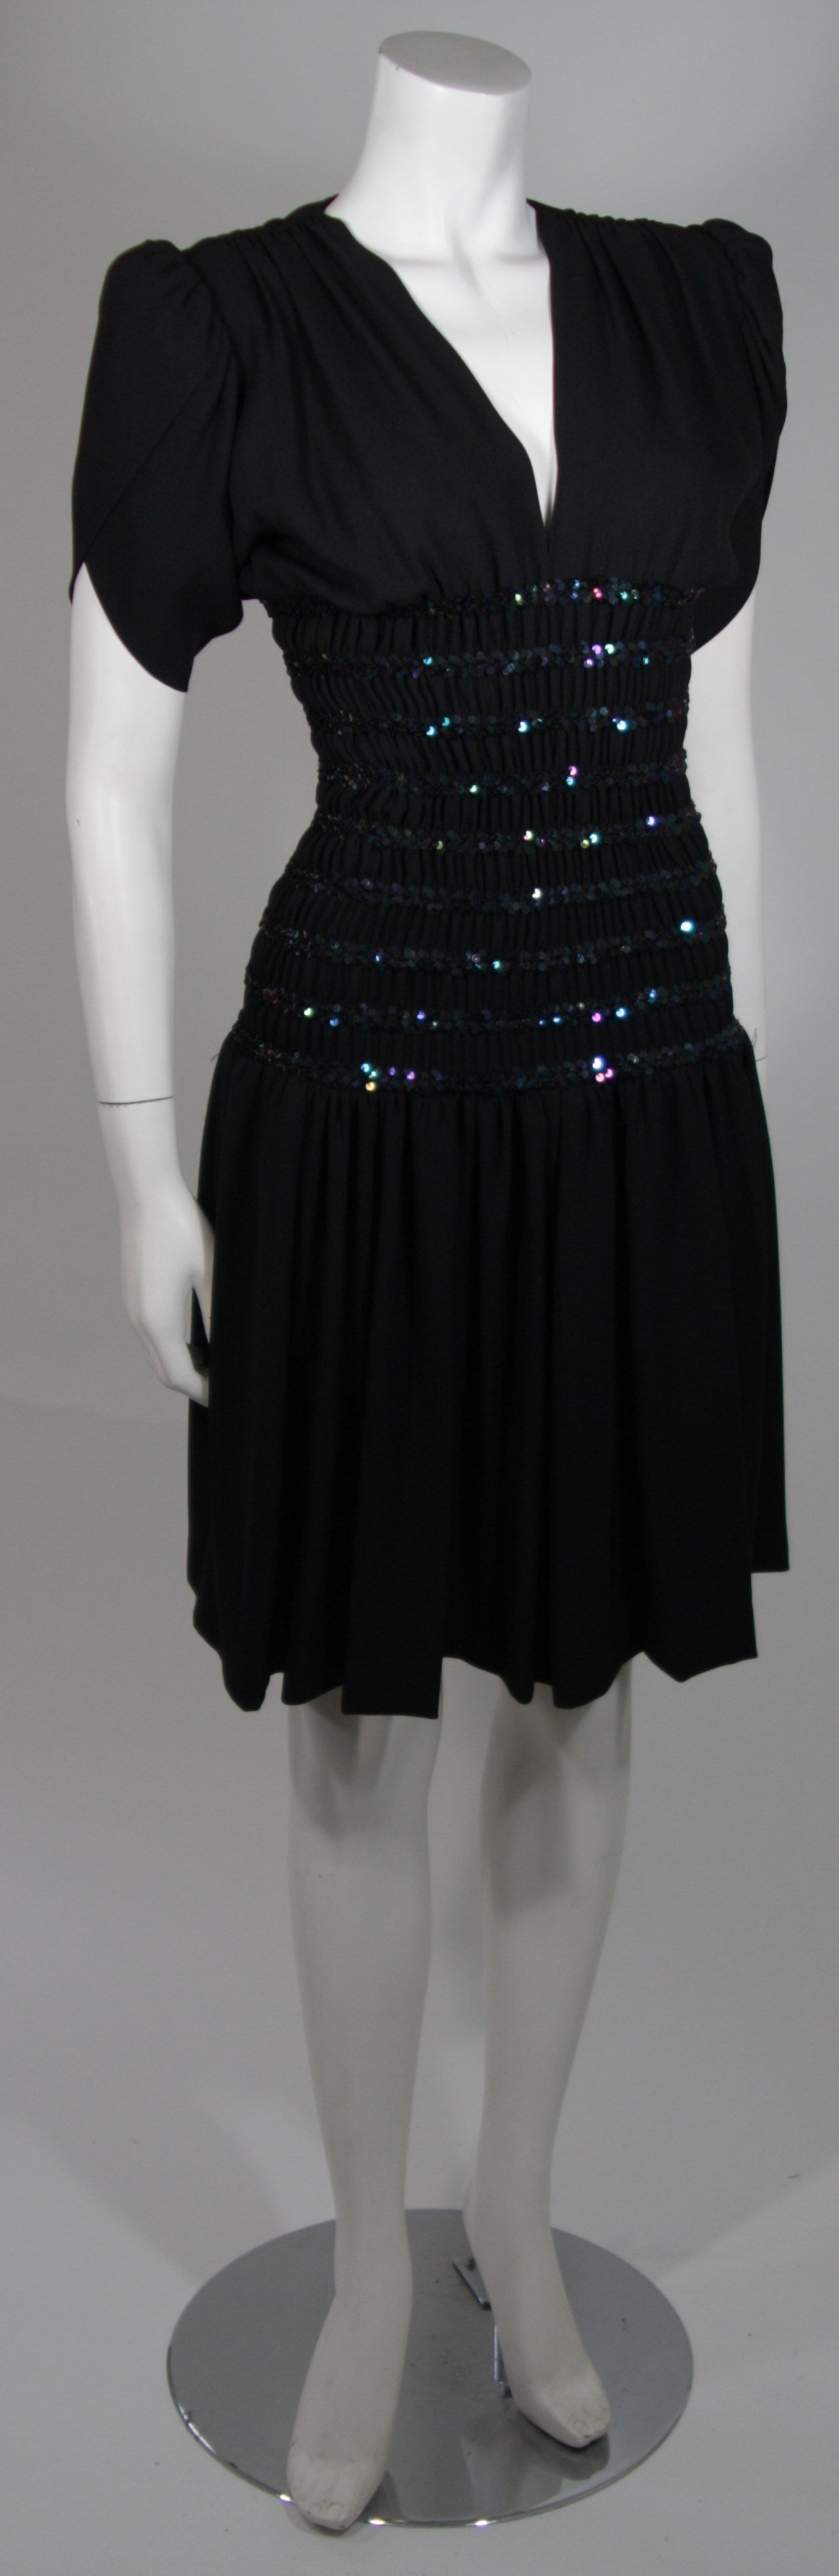 Yves Saint Laurent Black Cocktail Gown with Sequin Smocked Waist Size 38 In Excellent Condition For Sale In Los Angeles, CA